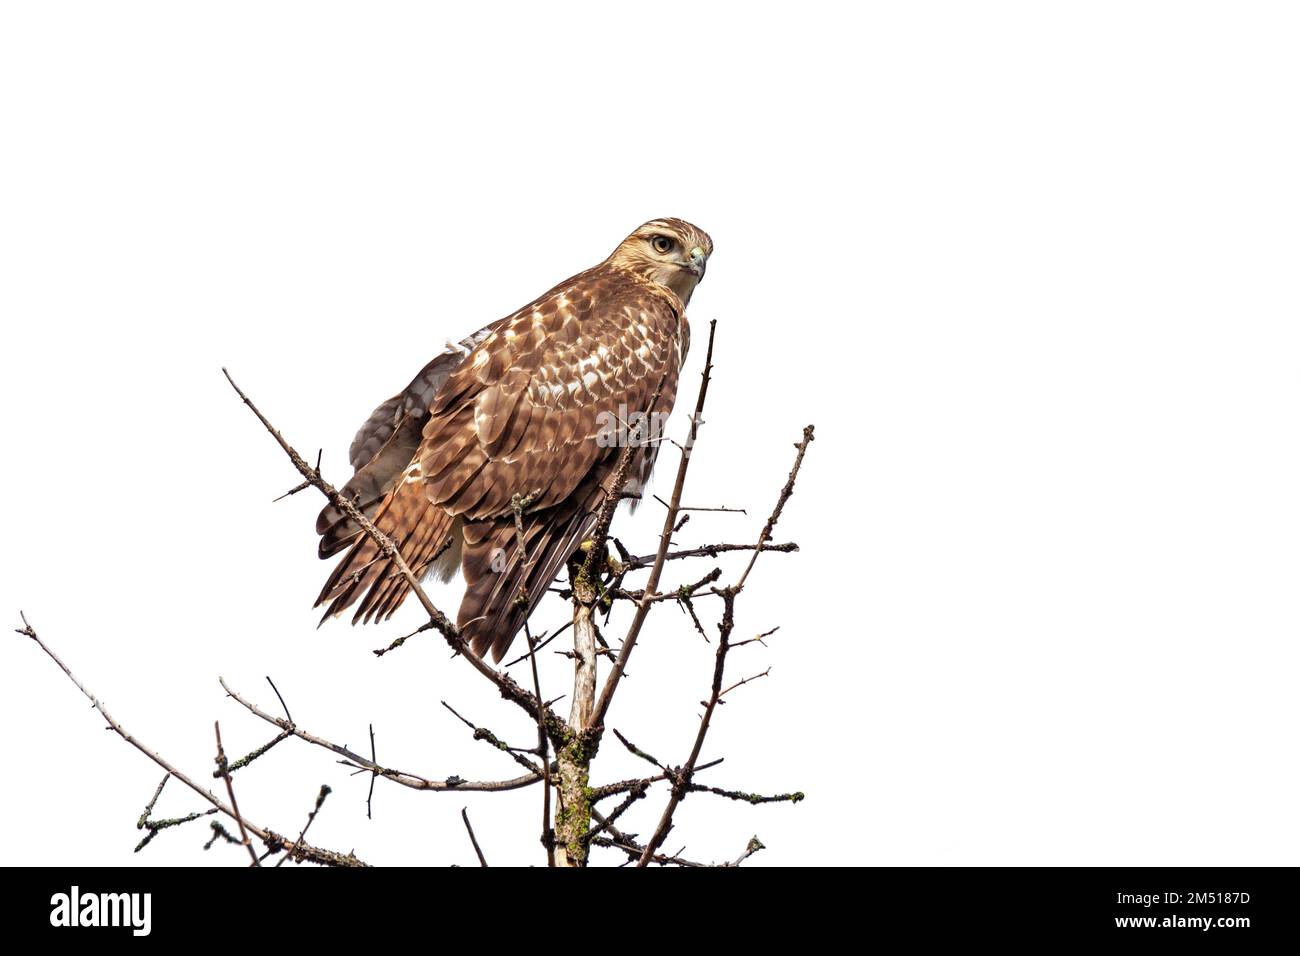 A red-tailed hawk perched on top of a pine tree with a white background background background Stock Photo